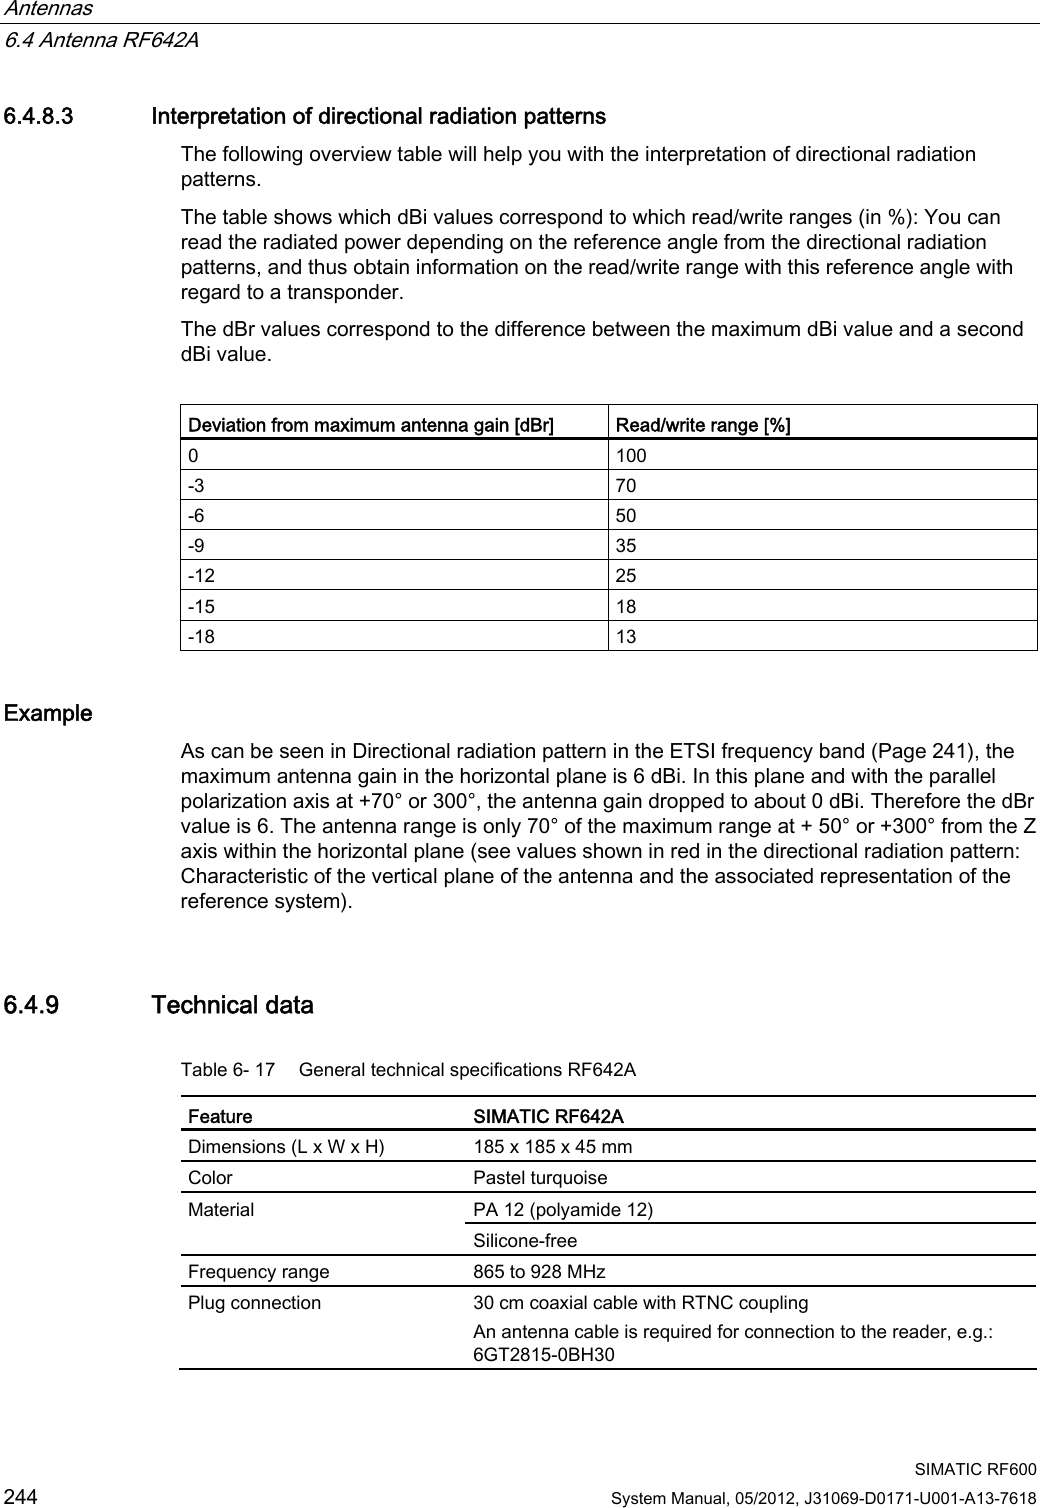 Antennas   6.4 Antenna RF642A  SIMATIC RF600 244 System Manual, 05/2012, J31069-D0171-U001-A13-7618 6.4.8.3 Interpretation of directional radiation patterns The following overview table will help you with the interpretation of directional radiation patterns.  The table shows which dBi values correspond to which read/write ranges (in %): You can read the radiated power depending on the reference angle from the directional radiation patterns, and thus obtain information on the read/write range with this reference angle with regard to a transponder. The dBr values correspond to the difference between the maximum dBi value and a second dBi value.  Deviation from maximum antenna gain [dBr]  Read/write range [%] 0  100 -3  70 -6  50 -9  35 -12  25 -15  18 -18  13 Example As can be seen in Directional radiation pattern in the ETSI frequency band (Page 241), the maximum antenna gain in the horizontal plane is 6 dBi. In this plane and with the parallel polarization axis at +70° or 300°, the antenna gain dropped to about 0 dBi. Therefore the dBr value is 6. The antenna range is only 70° of the maximum range at + 50° or +300° from the Z axis within the horizontal plane (see values shown in red in the directional radiation pattern: Characteristic of the vertical plane of the antenna and the associated representation of the reference system). 6.4.9 Technical data Table 6- 17  General technical specifications RF642A Feature  SIMATIC RF642A Dimensions (L x W x H)  185 x 185 x 45 mm Color  Pastel turquoise PA 12 (polyamide 12) Material Silicone-free Frequency range  865 to 928 MHz Plug connection  30 cm coaxial cable with RTNC coupling An antenna cable is required for connection to the reader, e.g.: 6GT2815-0BH30 